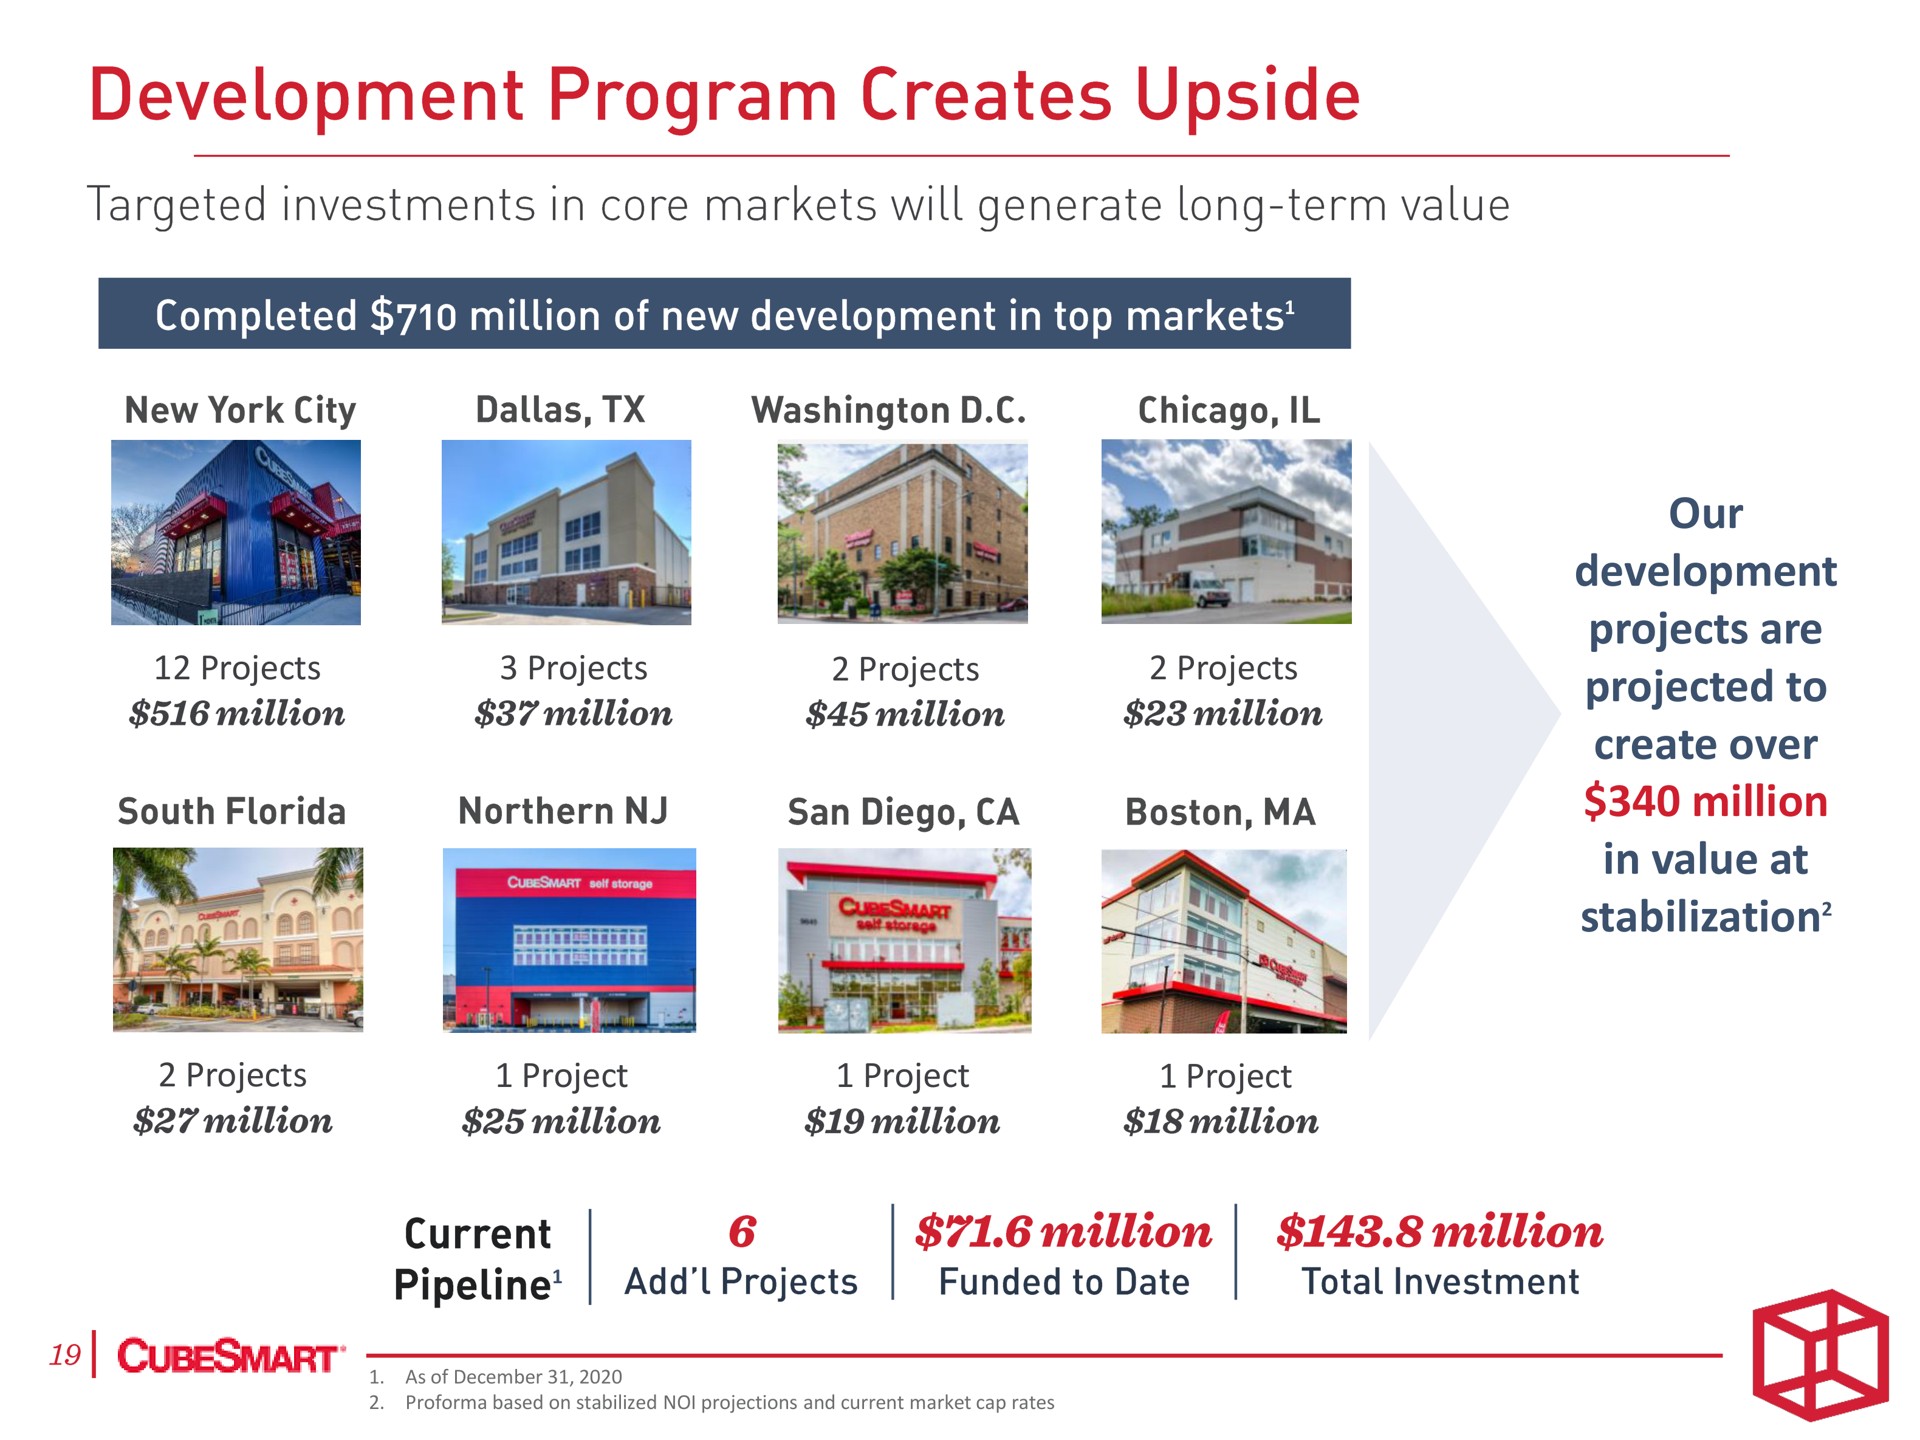 projects projects projects projects projects project project project our development projects are projected to create over million in value at stabilization program creates upside san boston a go | CubeSmart